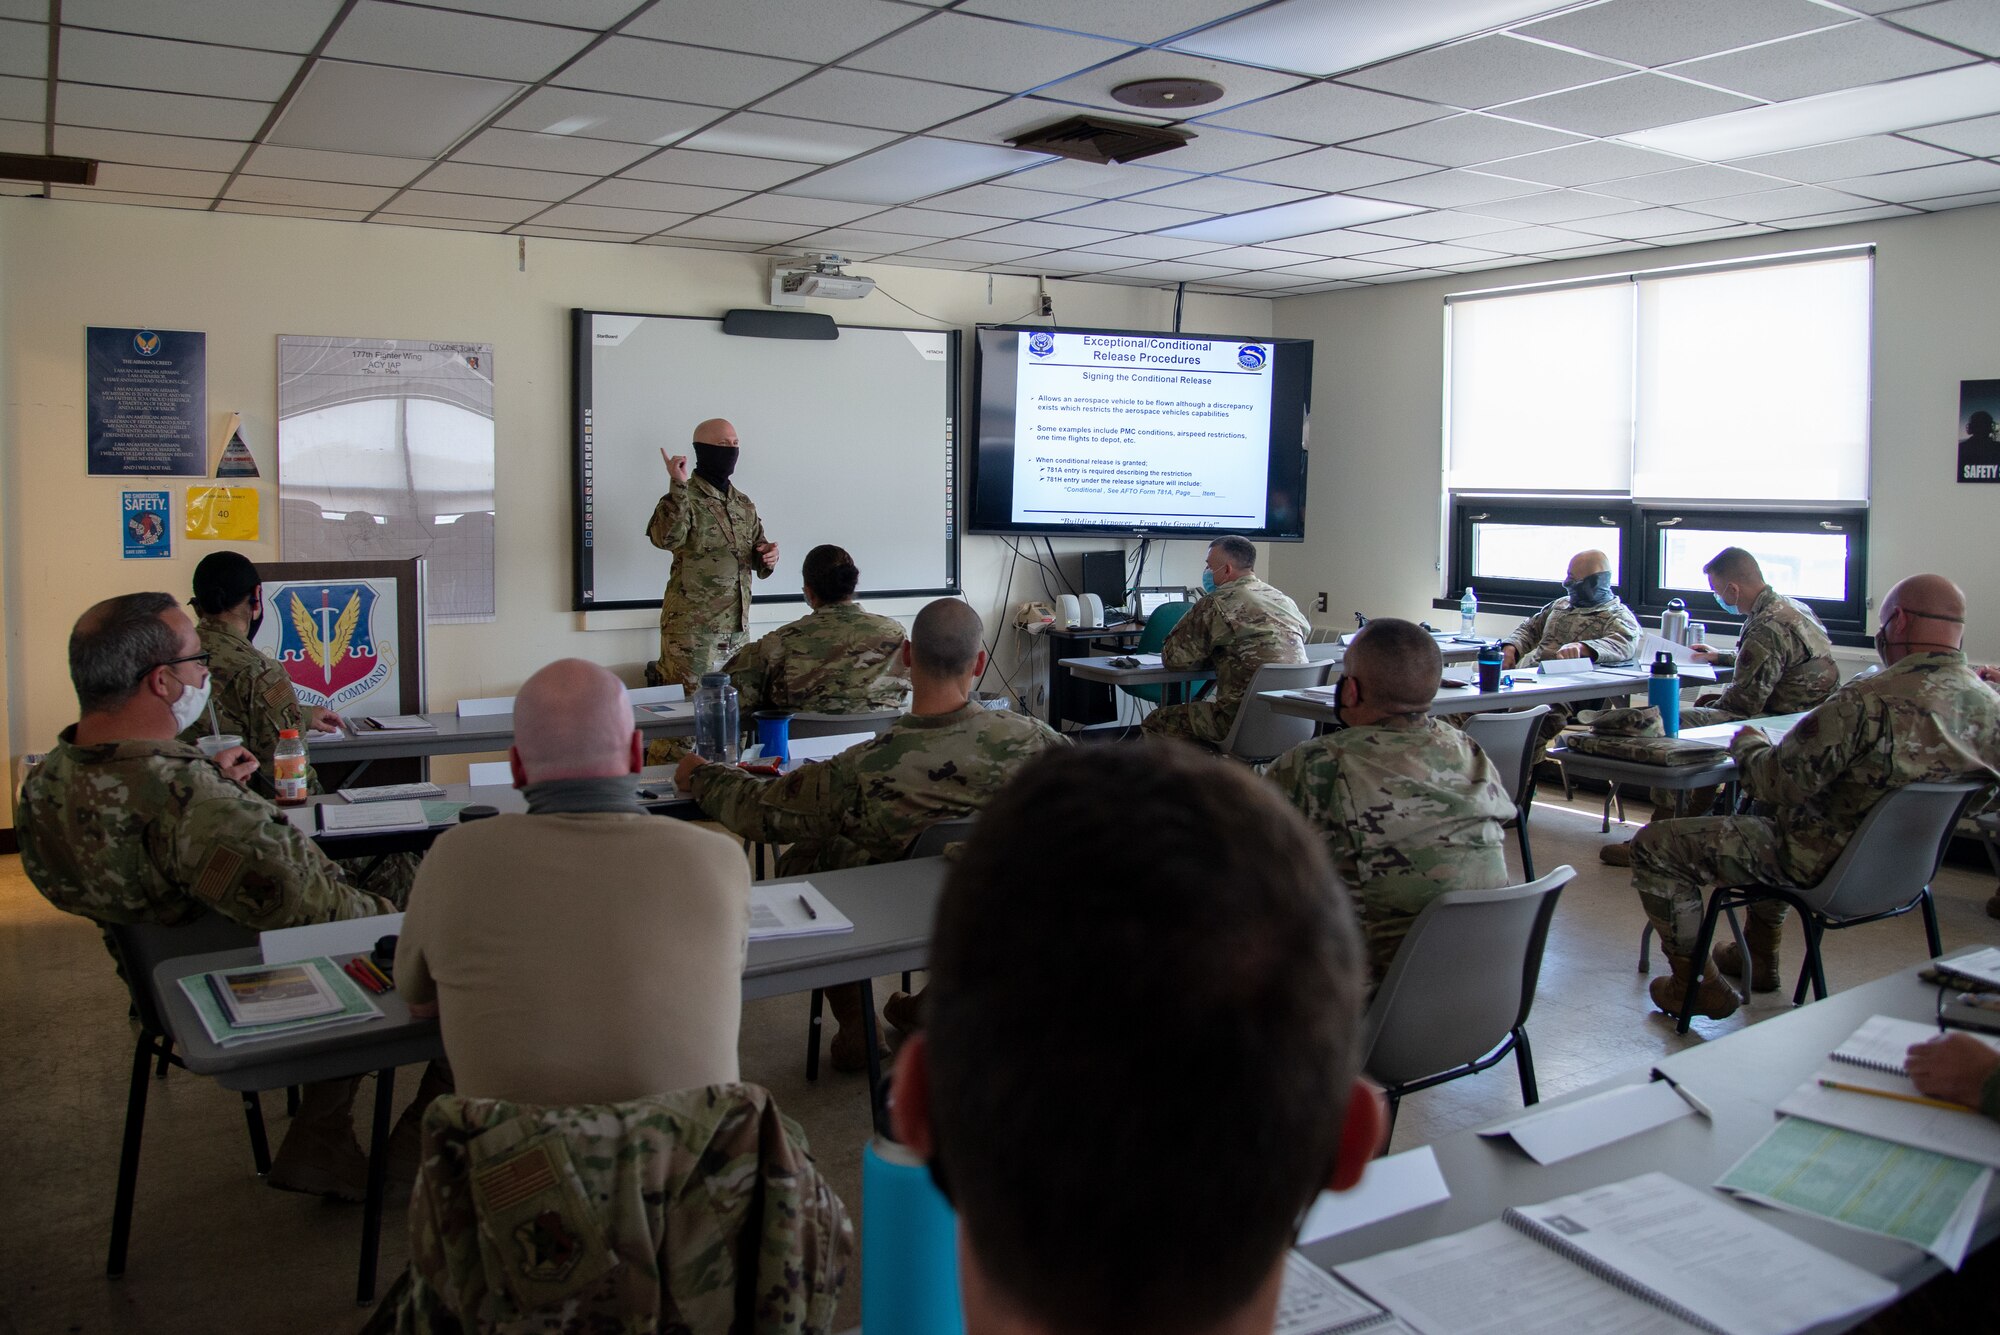 A photo of SMSgt. Dean L. Couch teaching 177th Aircraft Maintenance Squadron members.